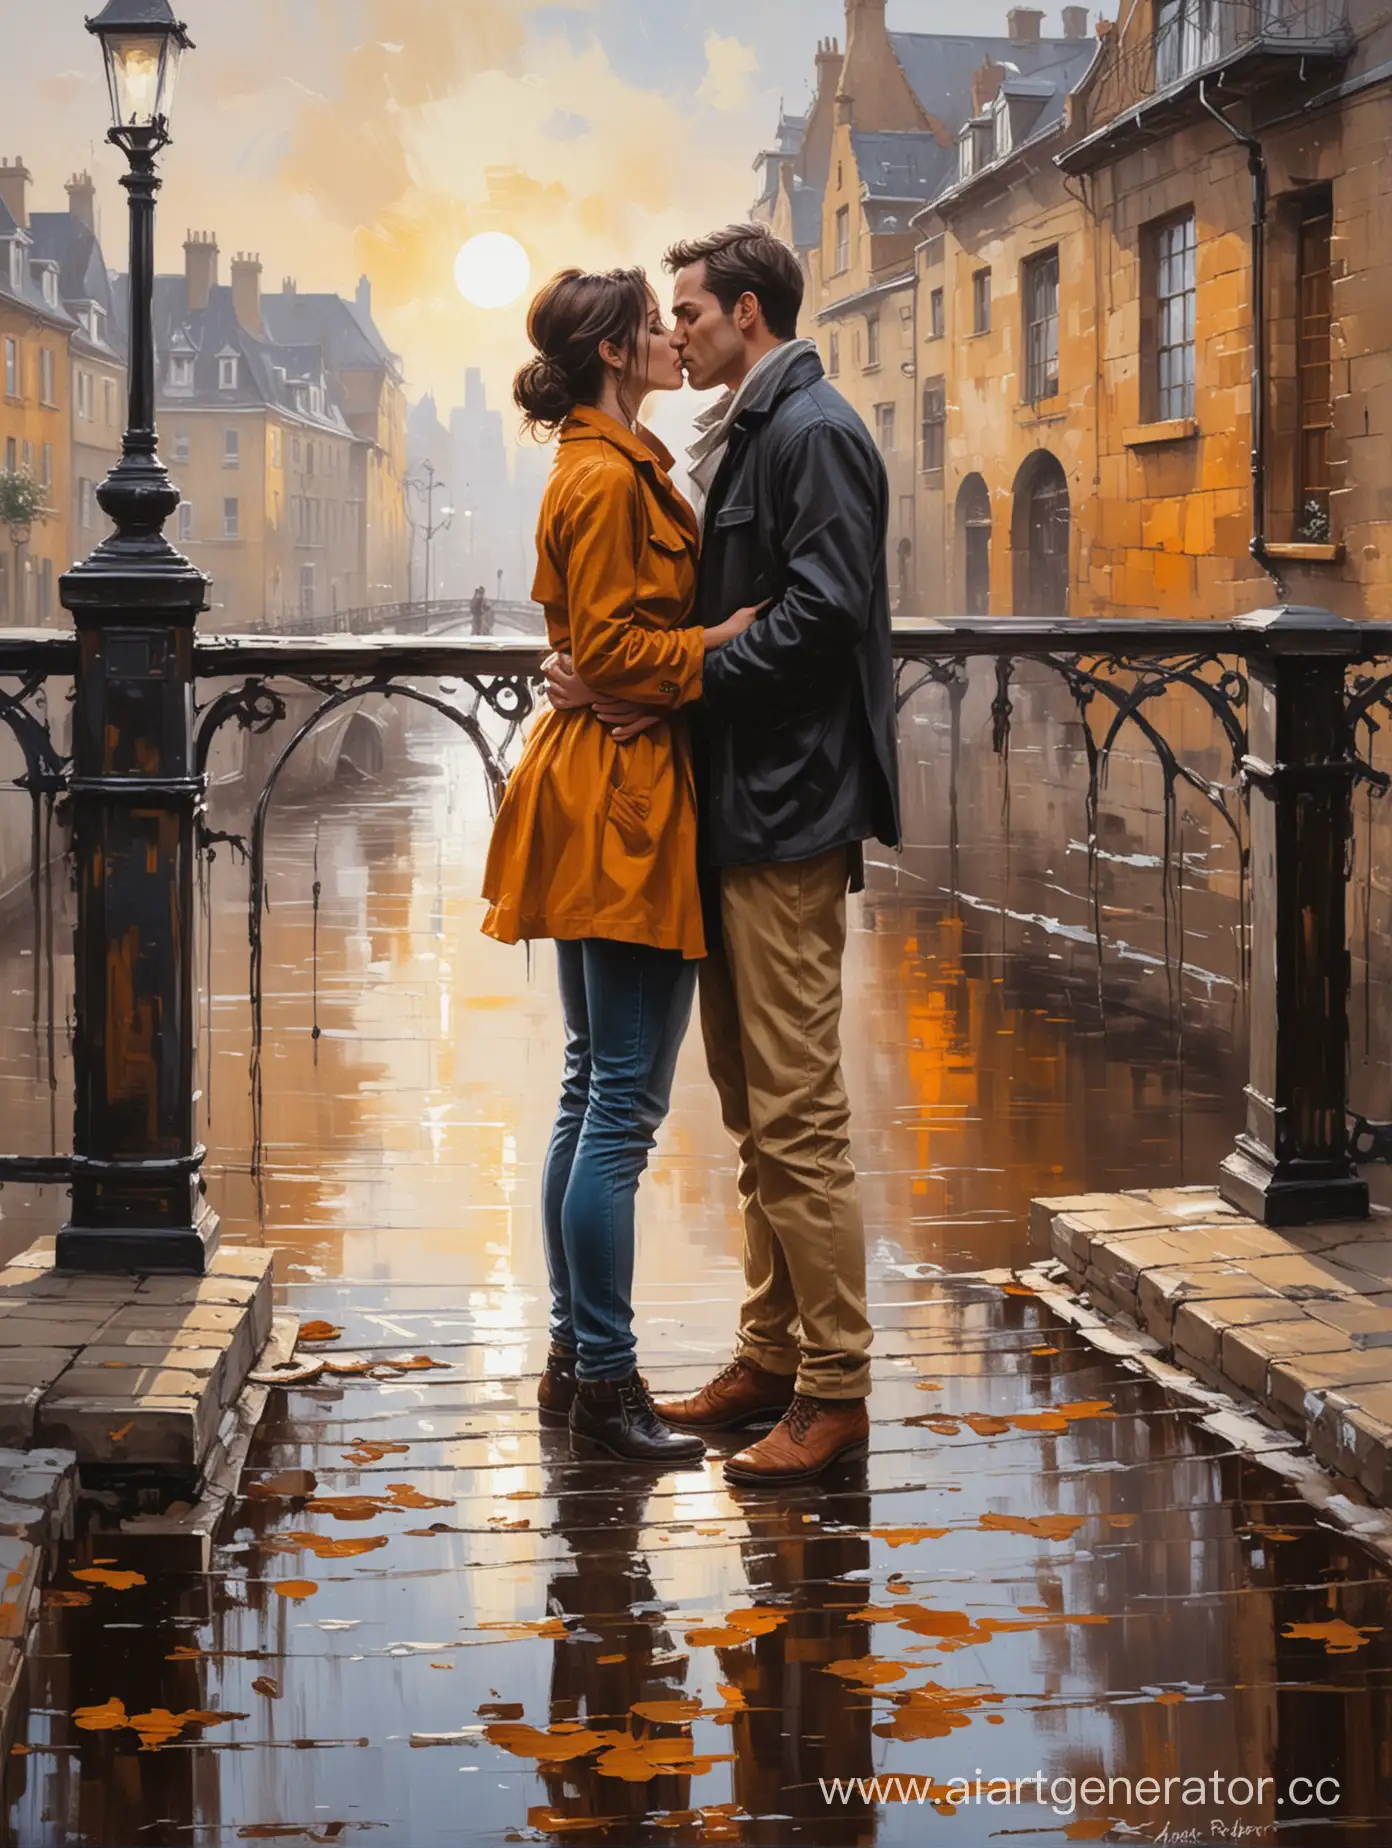 kissing lovers on the bridge acrylic painting by jonathan oshryvich, in the style of emerico imre toth, urban street art, walter langley, candid moments captured, willem haenraets, dark amber and white, romantic manga —ar 85:128